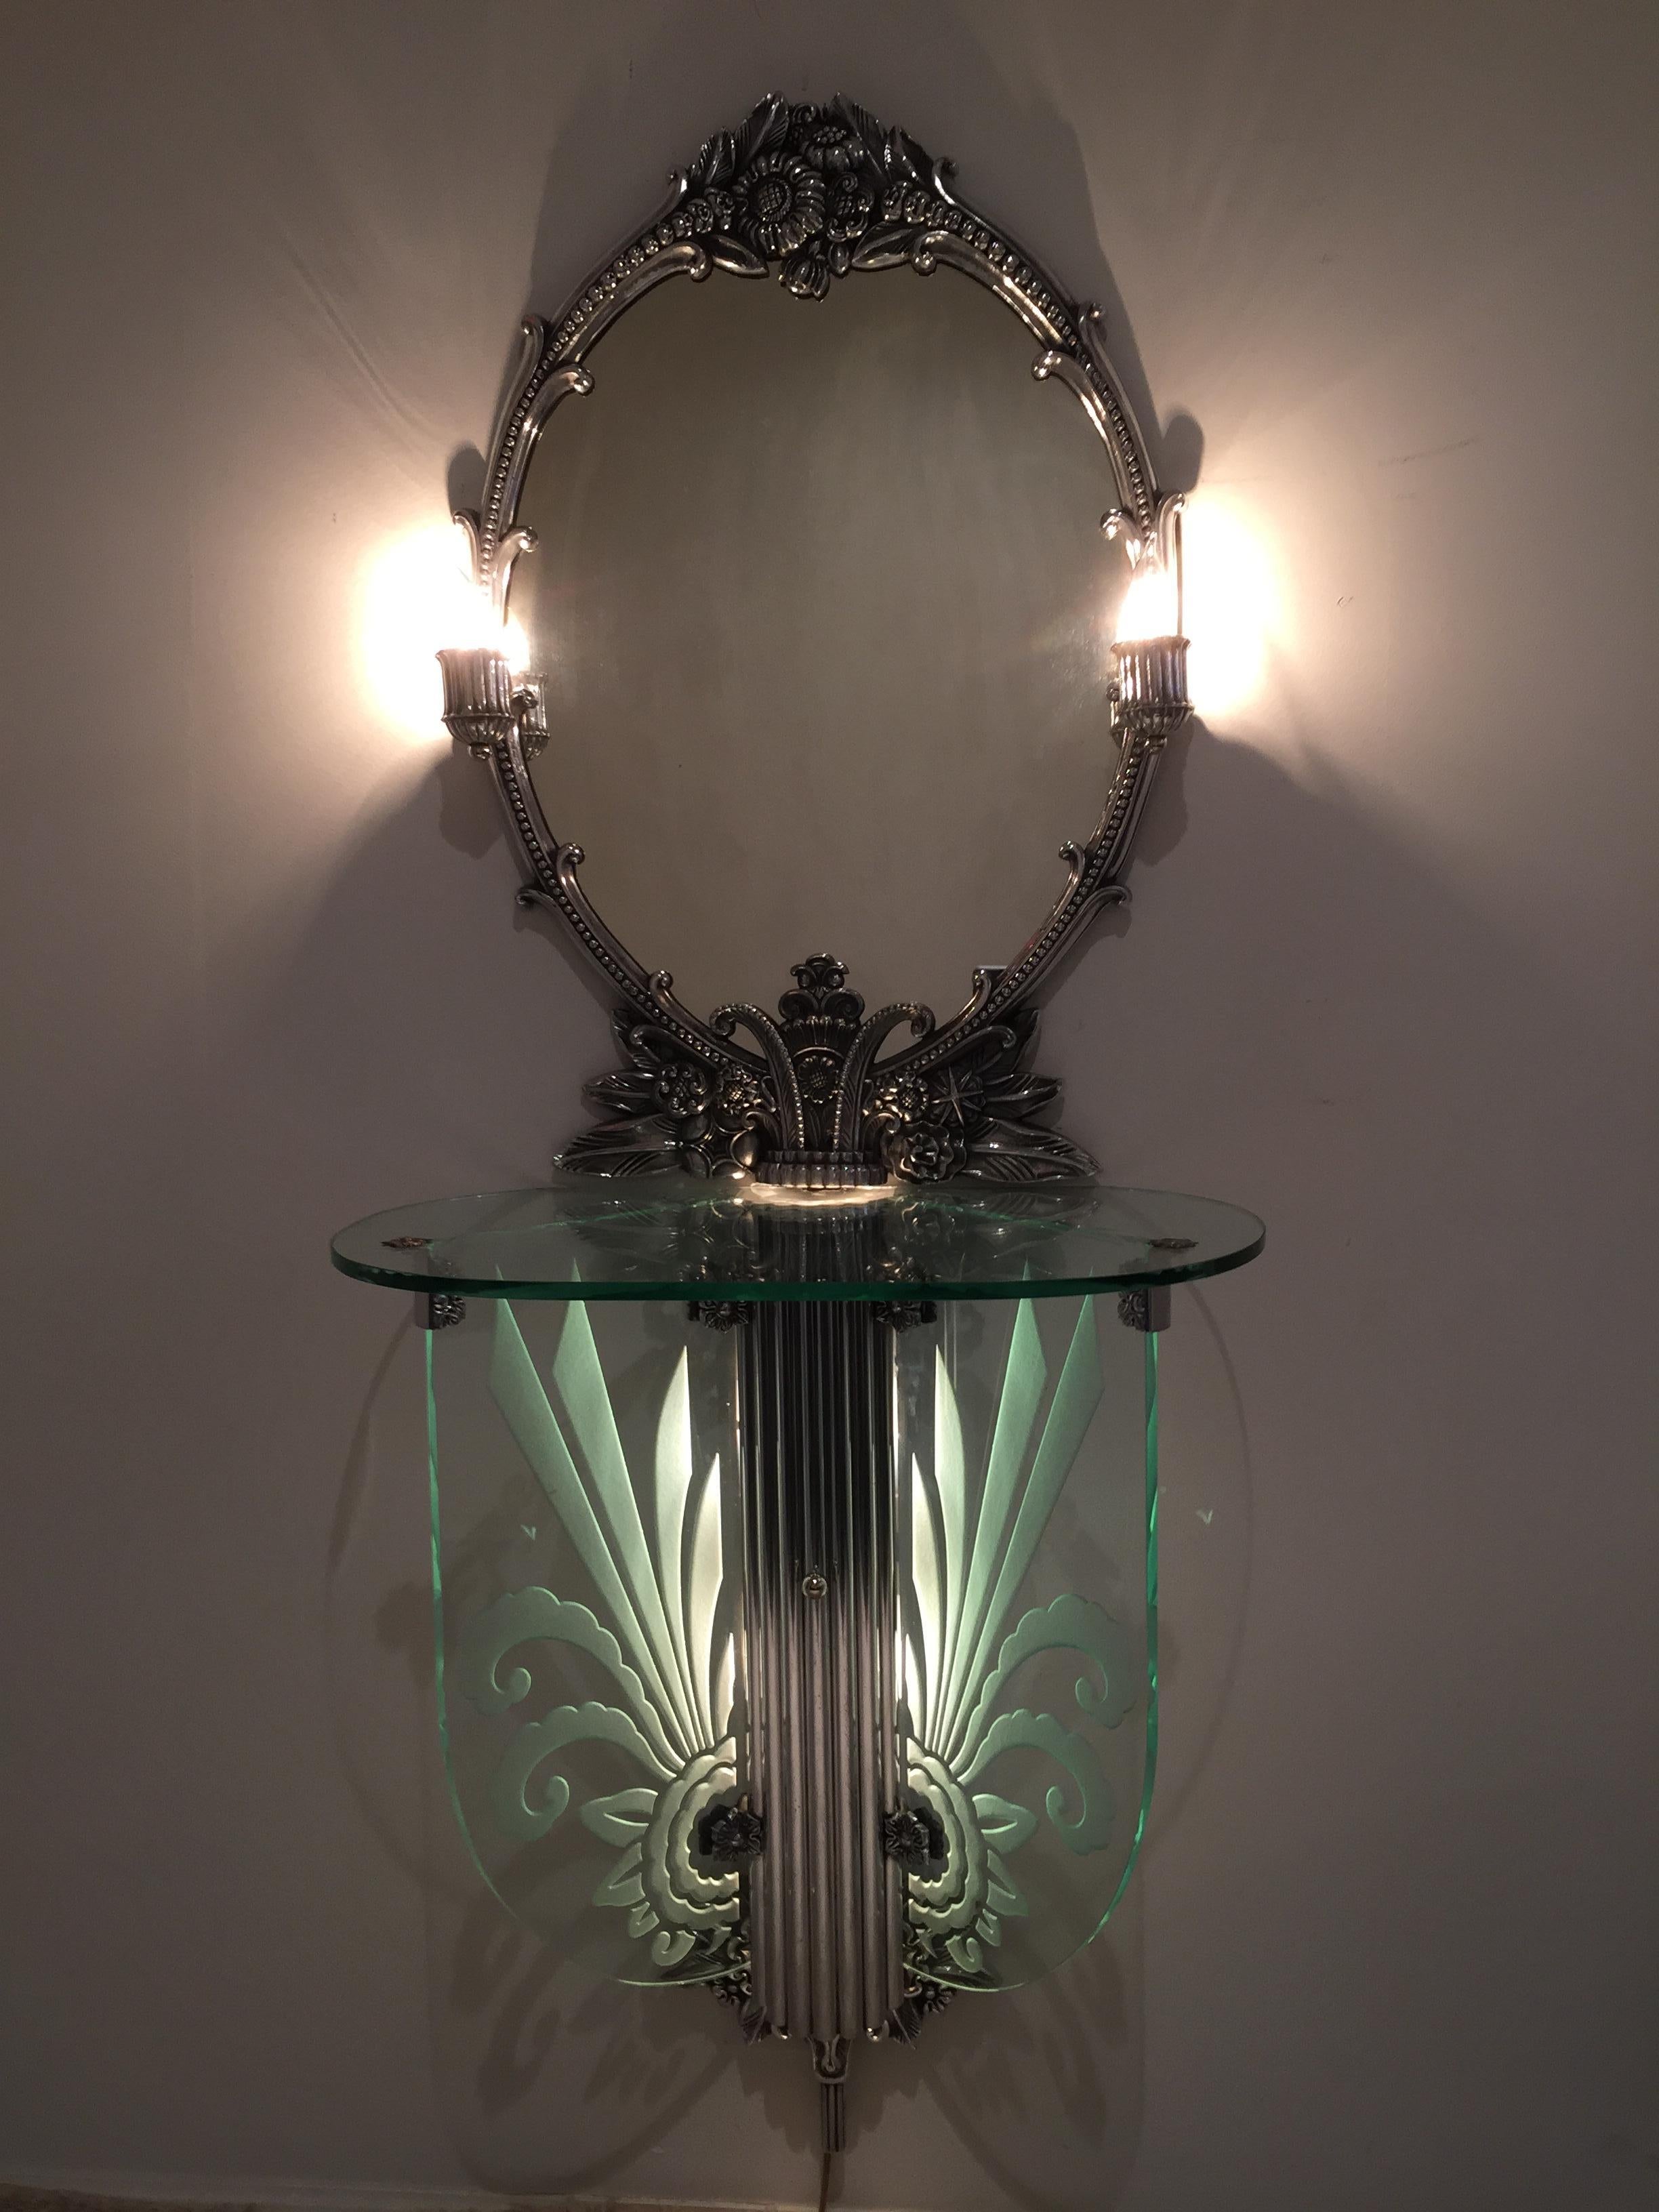 Américain Vanity Together Mirror with Stool Paramount Theater Boston en vente